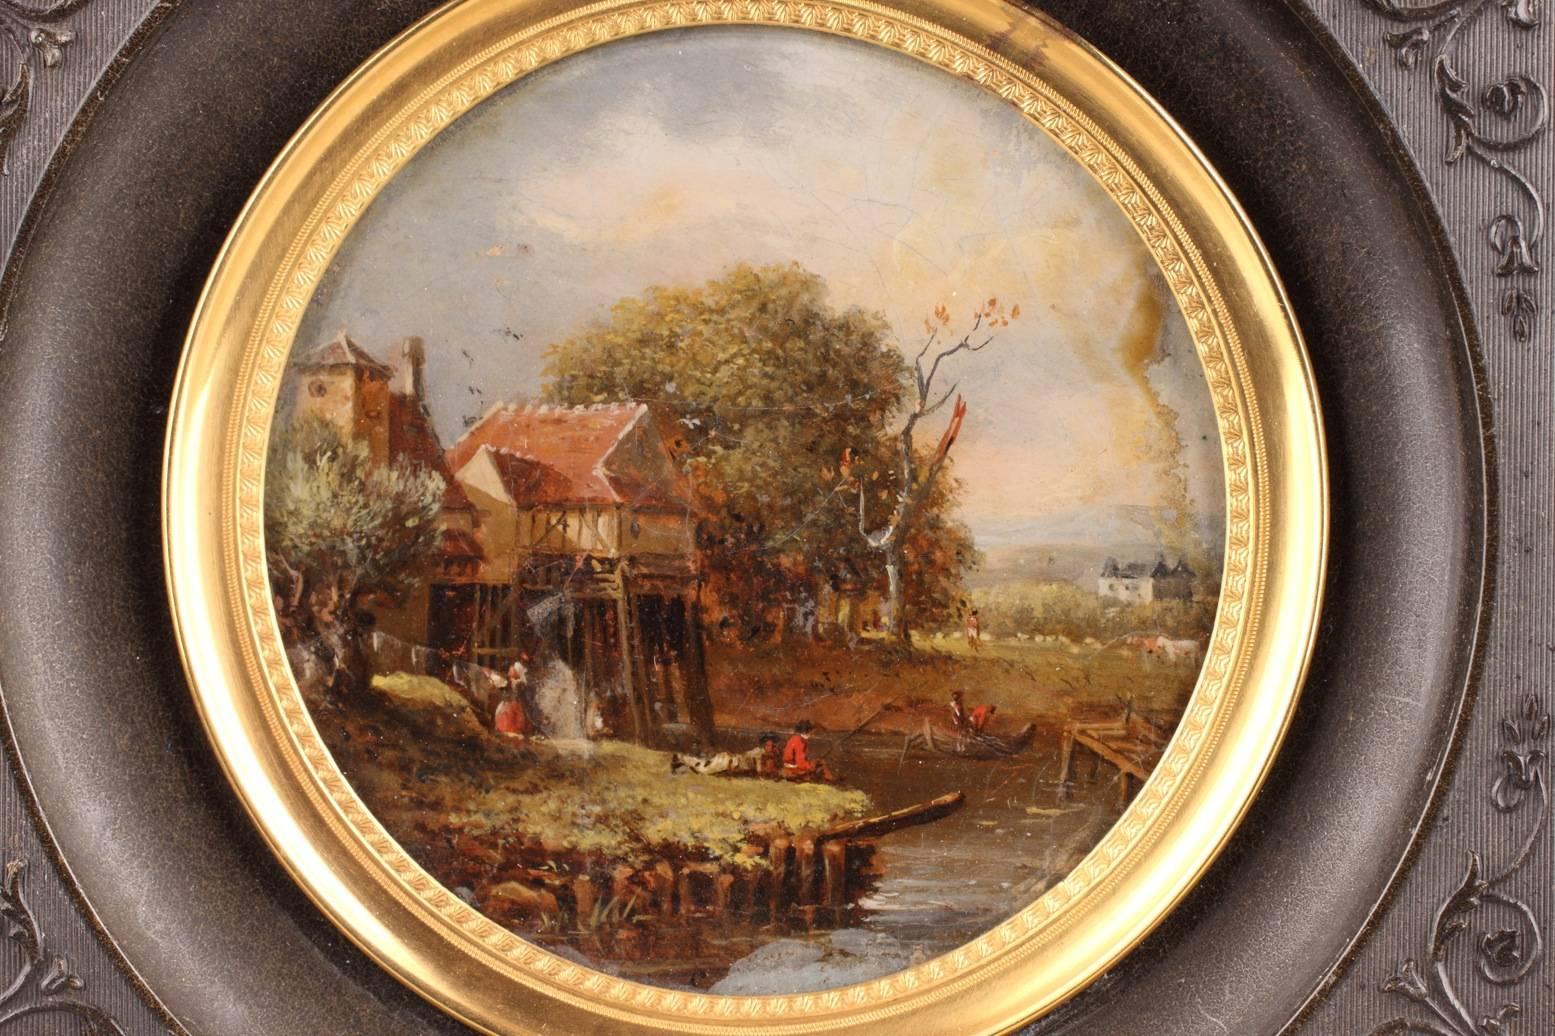 Round, reverse glass painting with its frame, featuring a countryside scene near a river. In the foreground, two young fishermen sit on the grass. Behind them to the left, a man and a woman are working in front of a mill that is surrounded by trees.